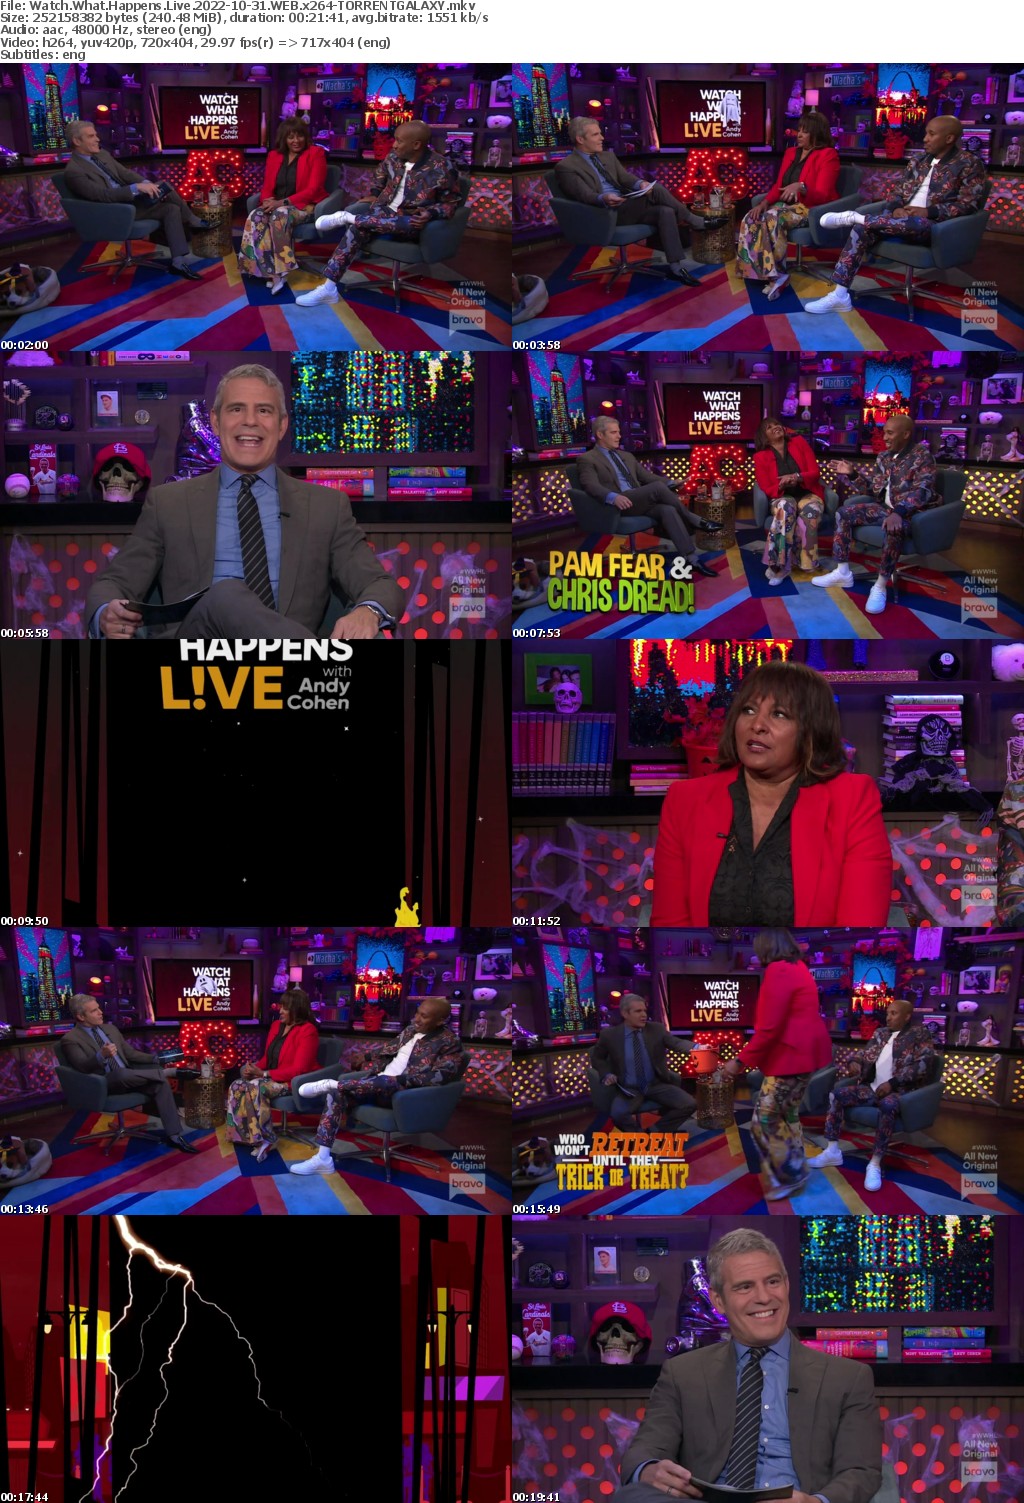 Watch What Happens Live 2022-10-31 WEB x264-GALAXY